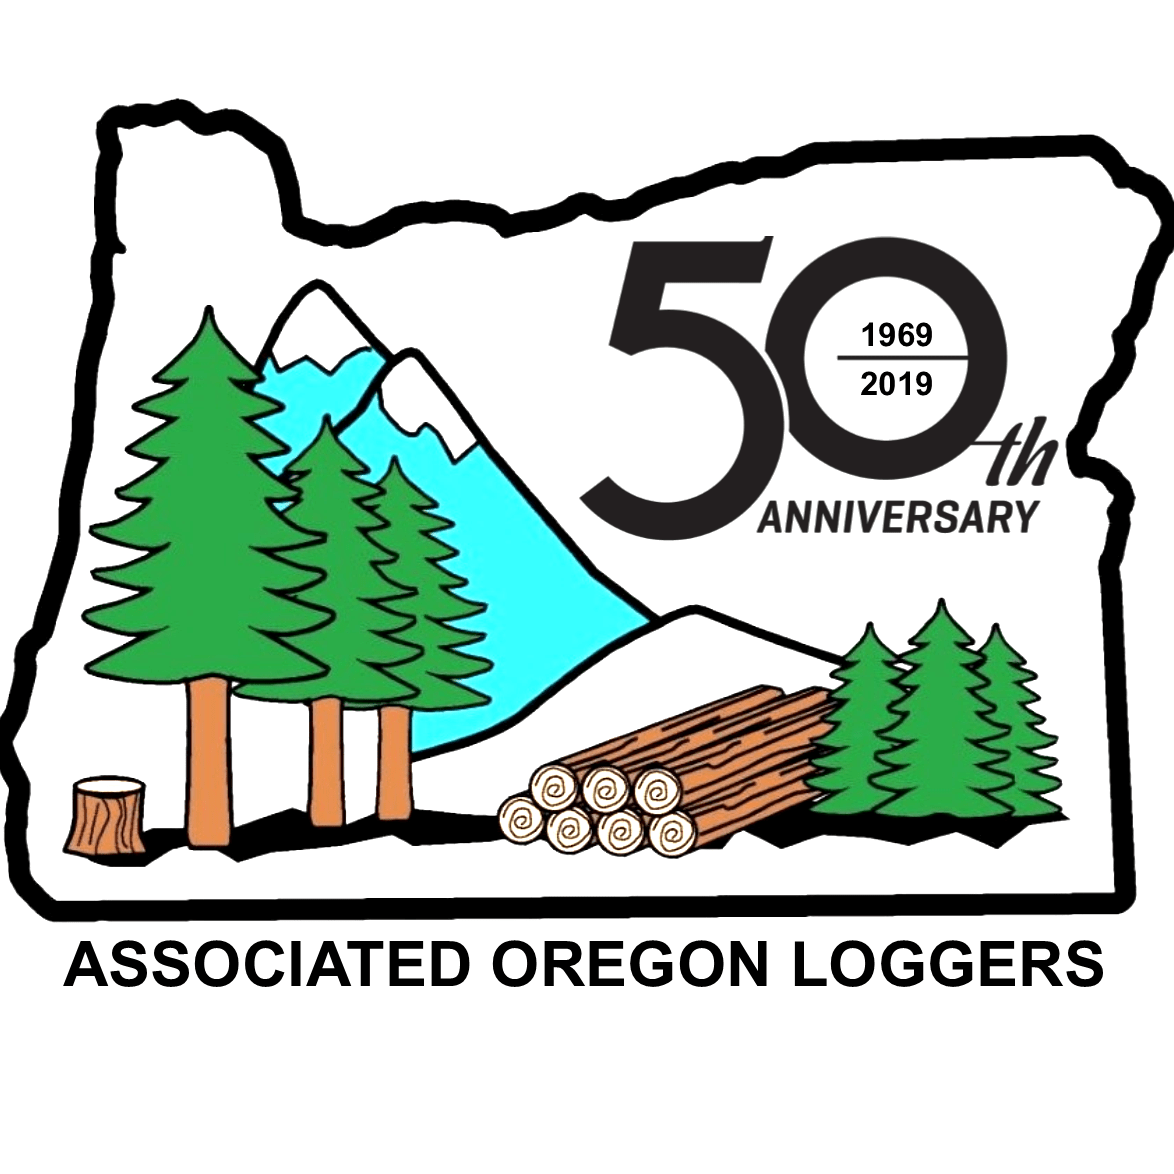 Associated Oregon Loggers: 50 Years Strong